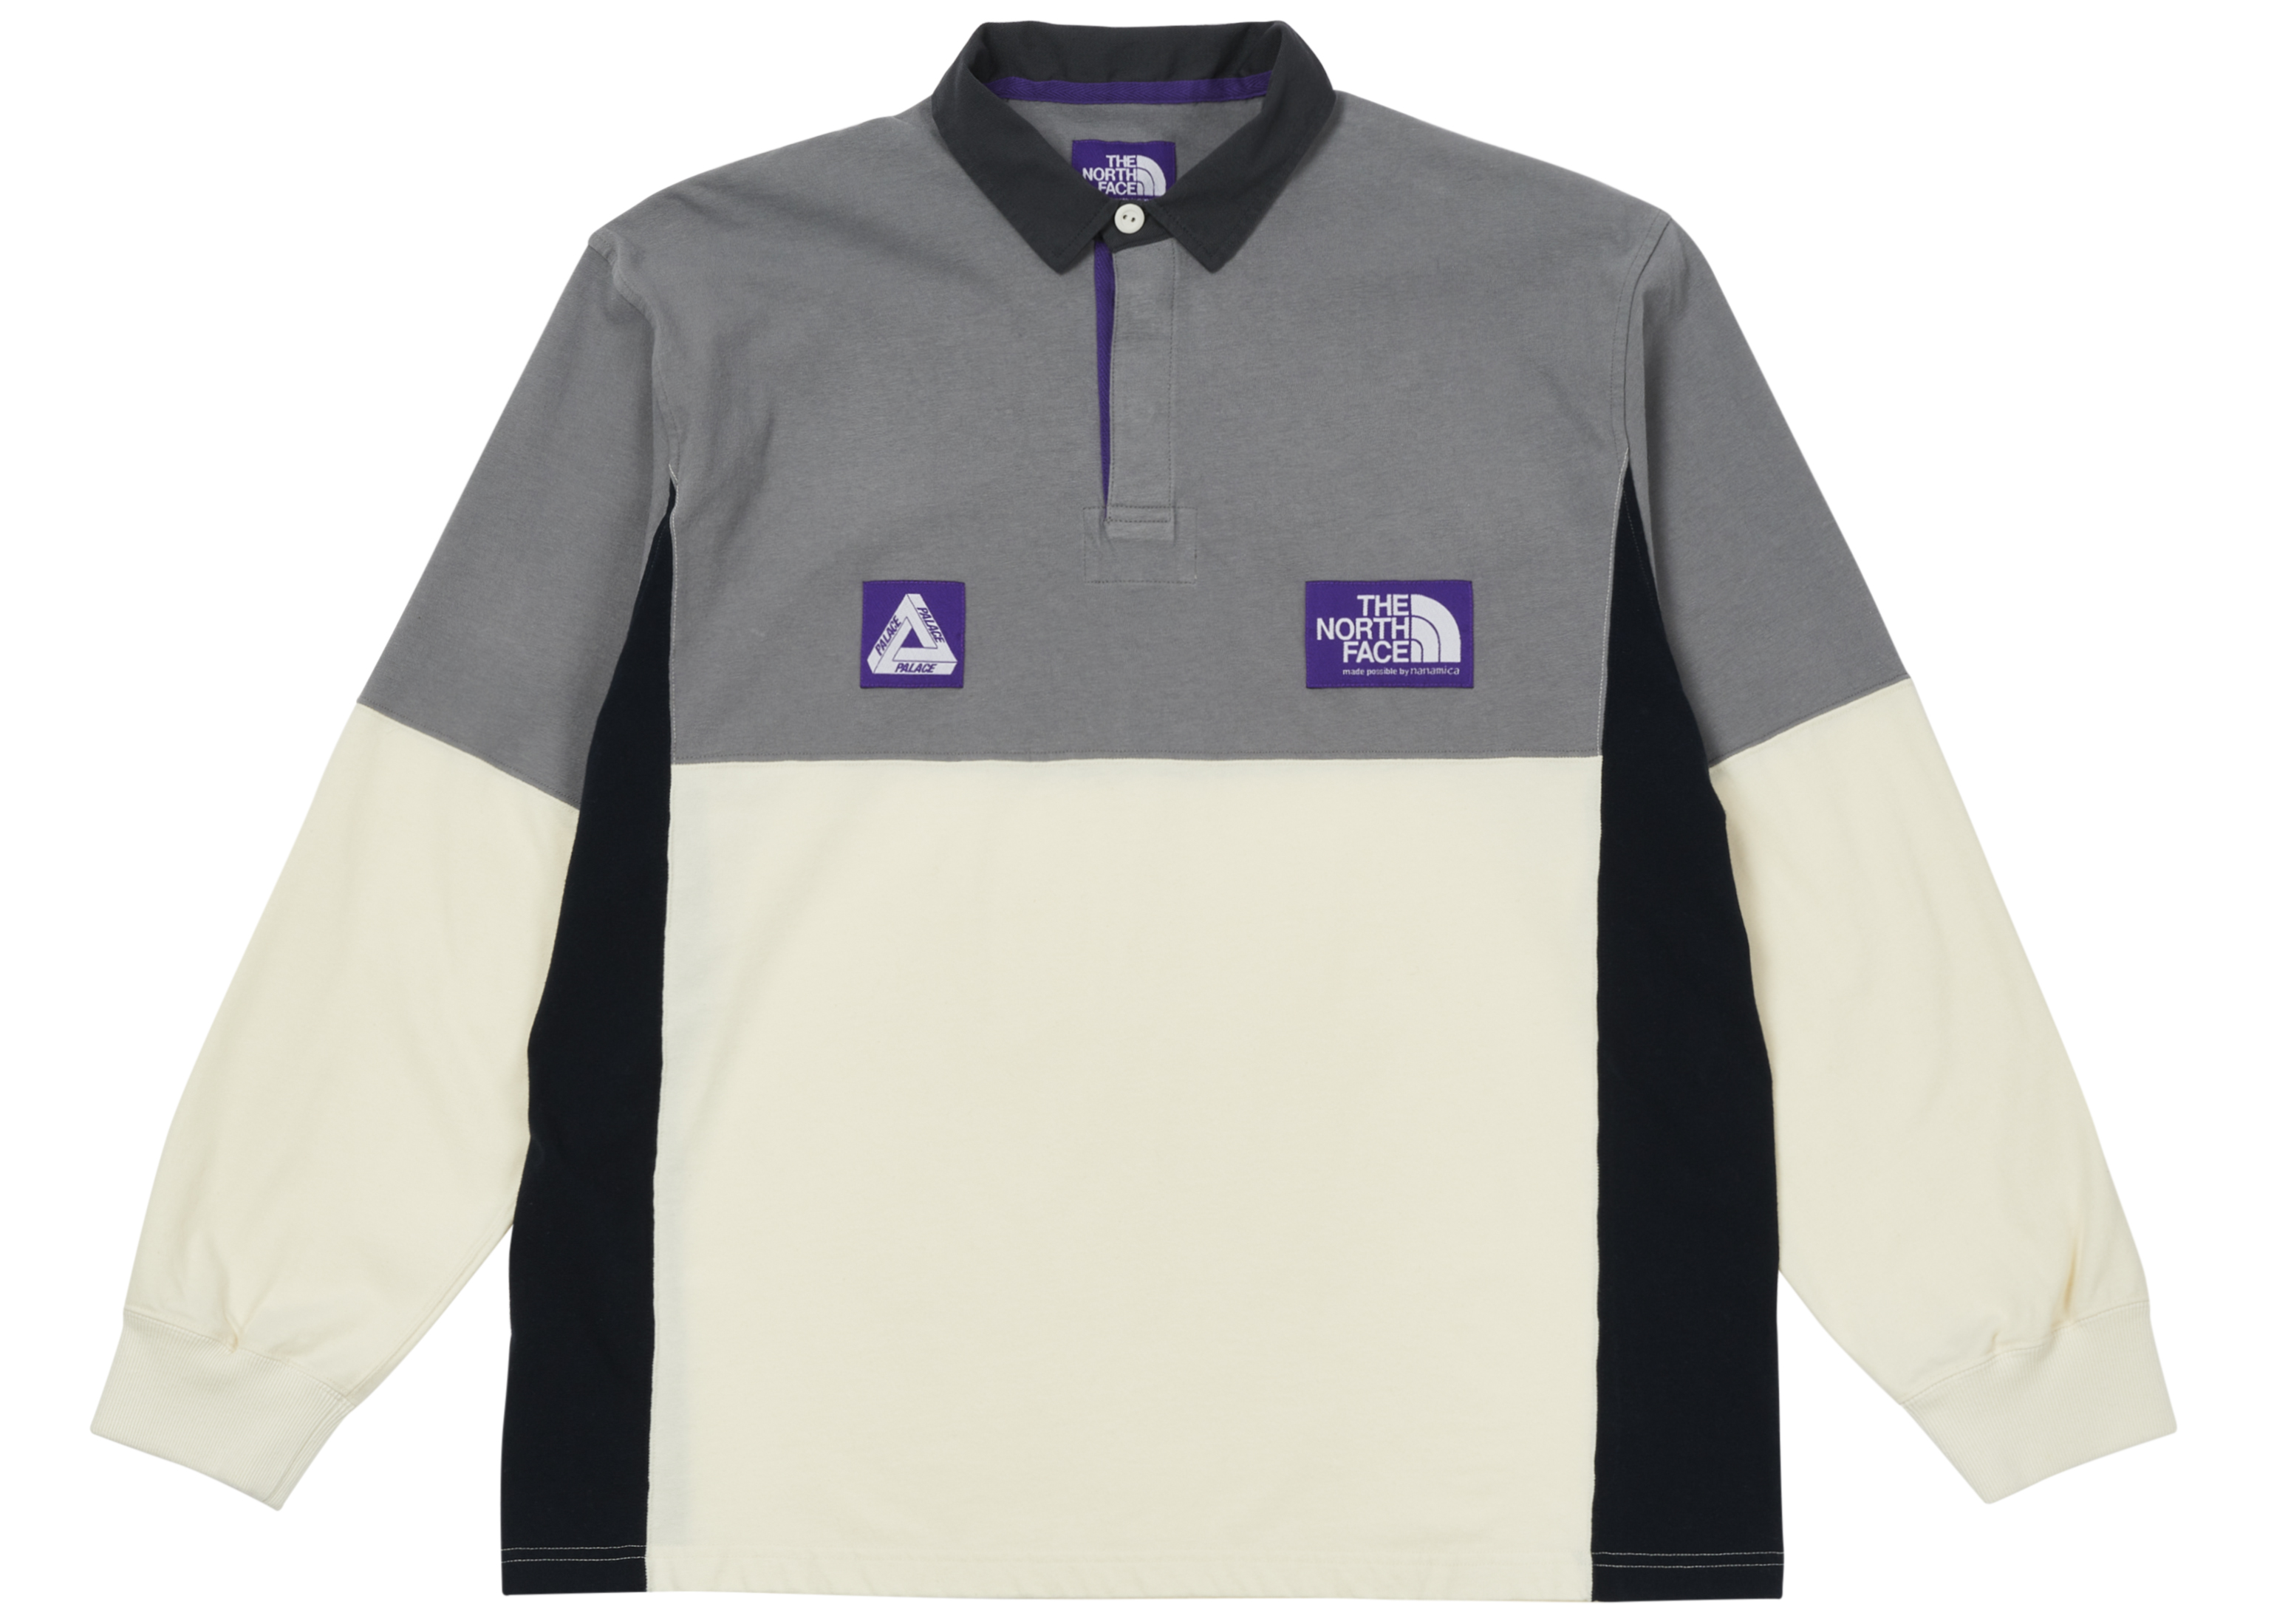 PALACE×THE NORTH FACE rugby shirt | www.trevires.be